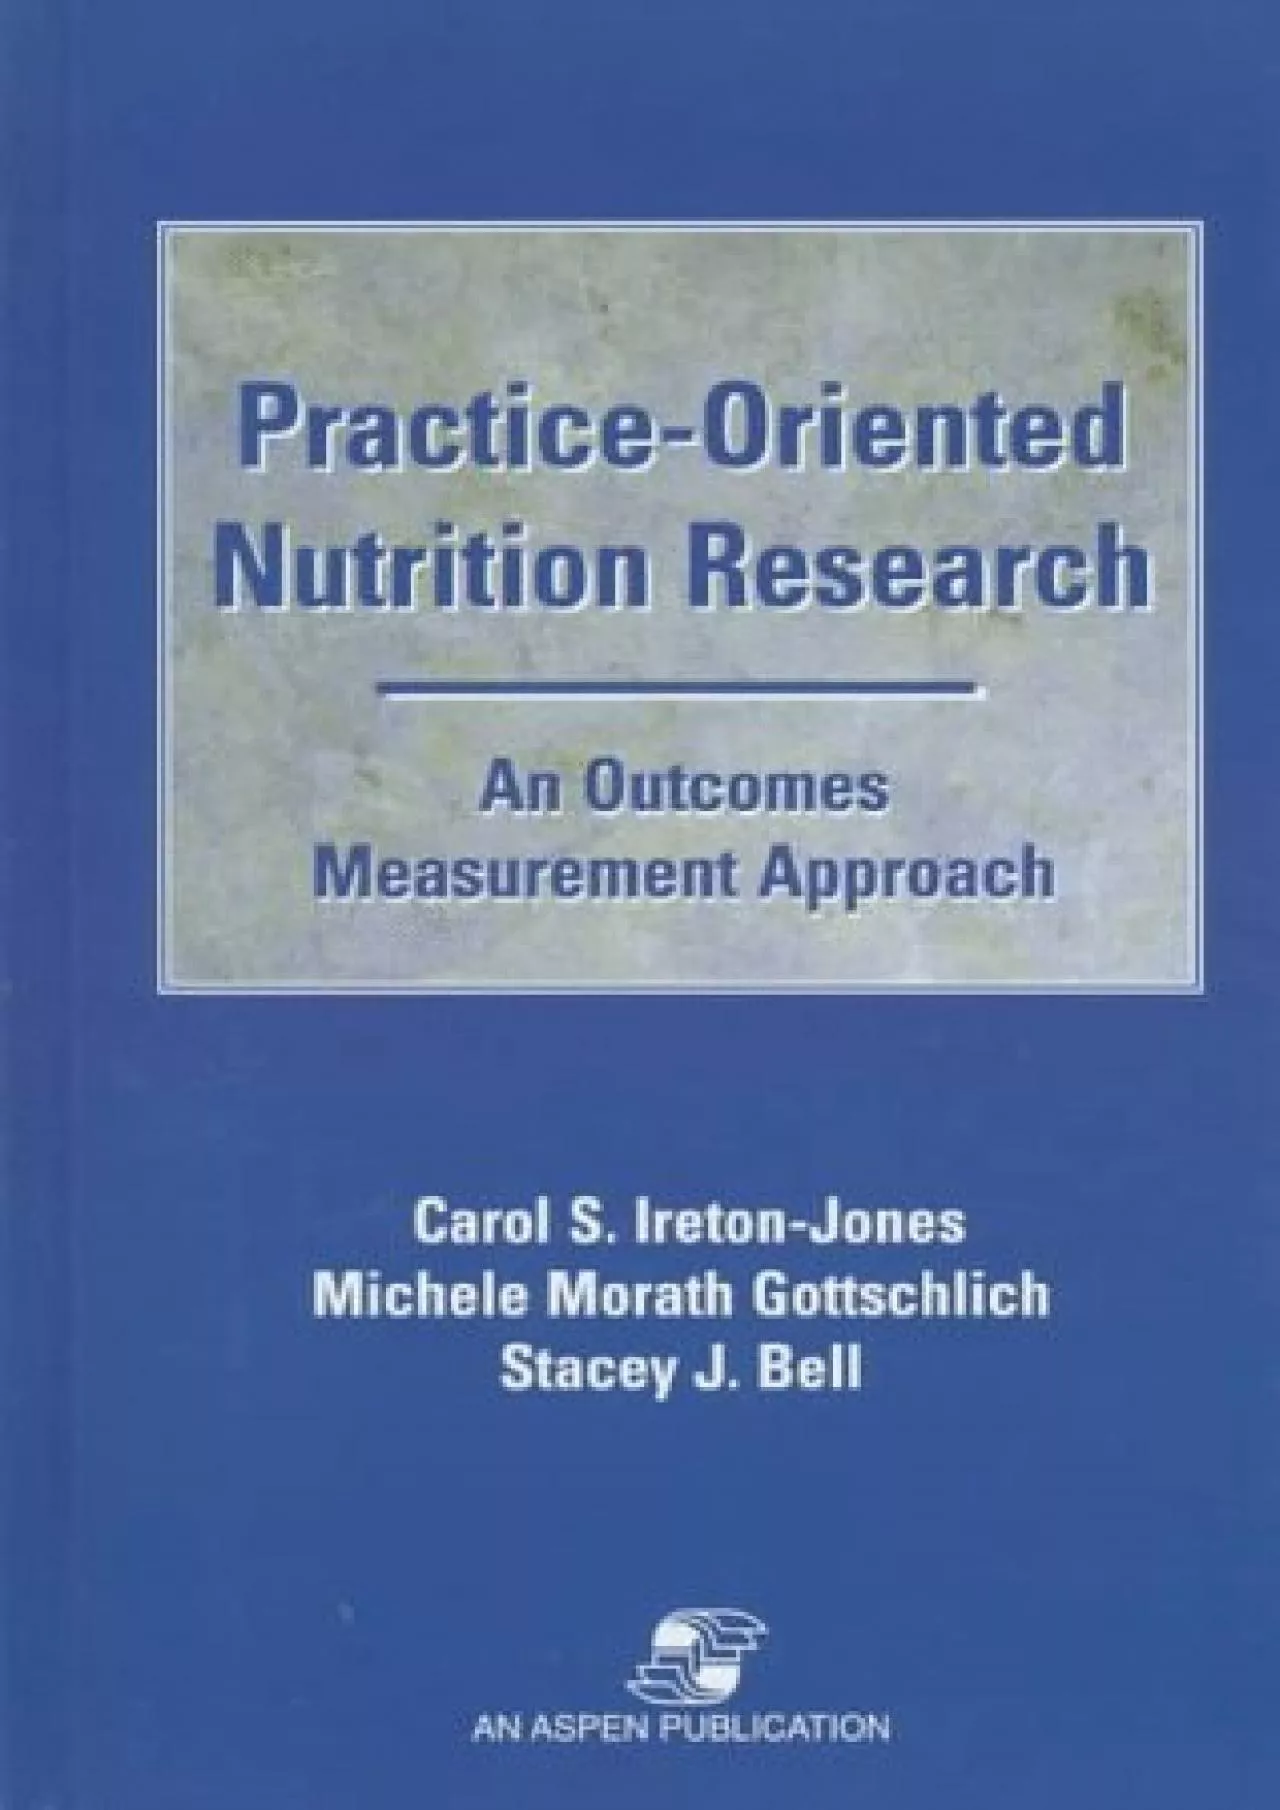 (DOWNLOAD)-Practice-Oriented Nutrition Research: An Outcomes Measurement Approach: An